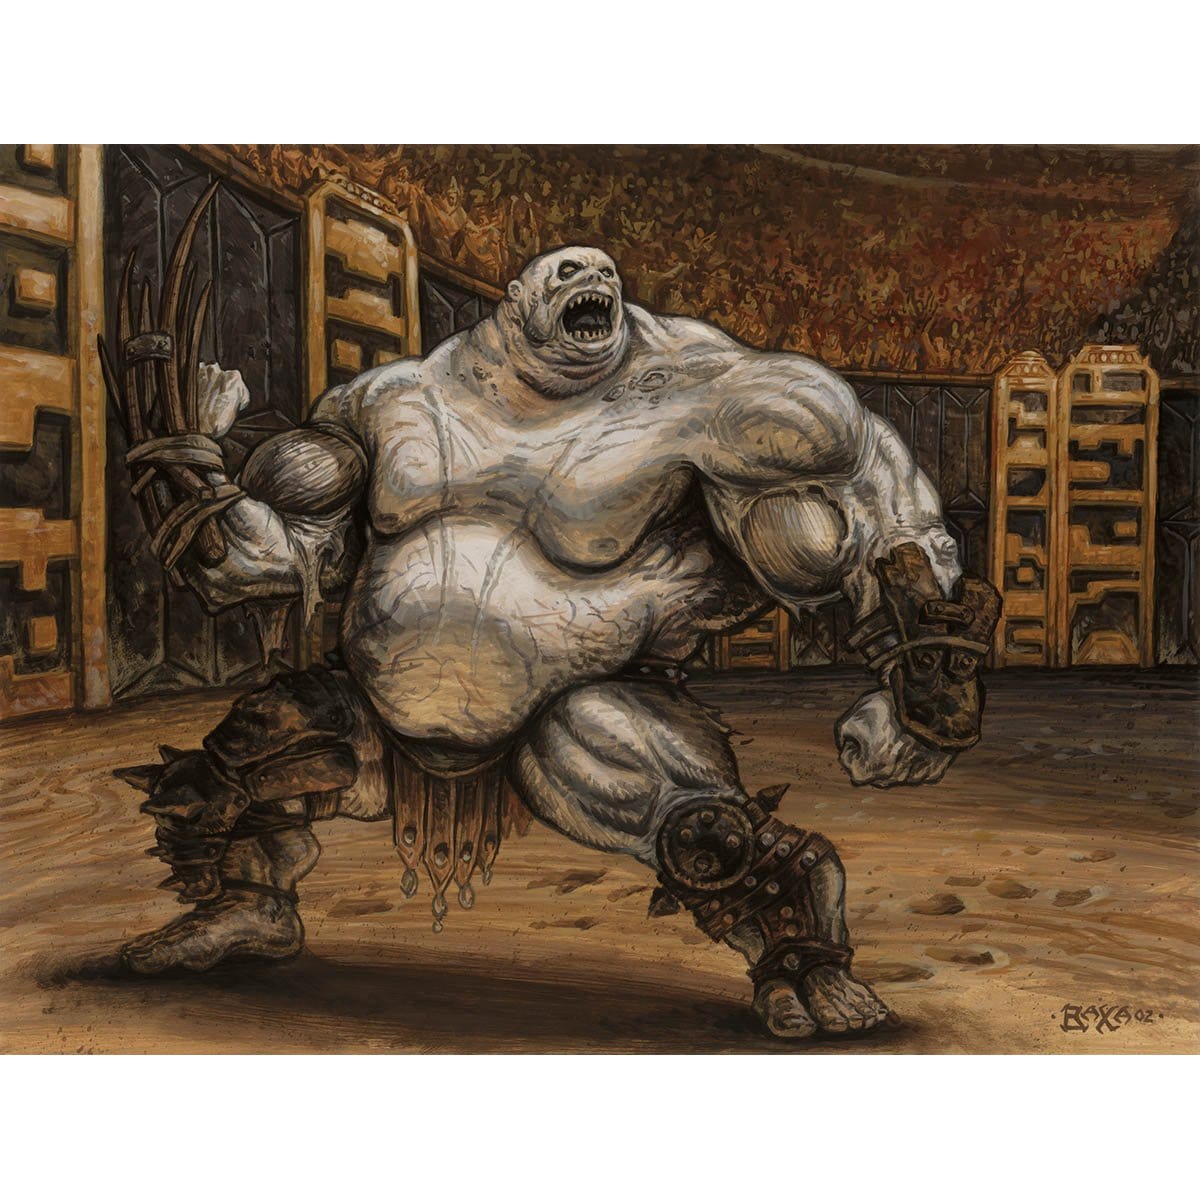 Gluttonous Zombie Print - Print - Original Magic Art - Accessories for Magic the Gathering and other card games